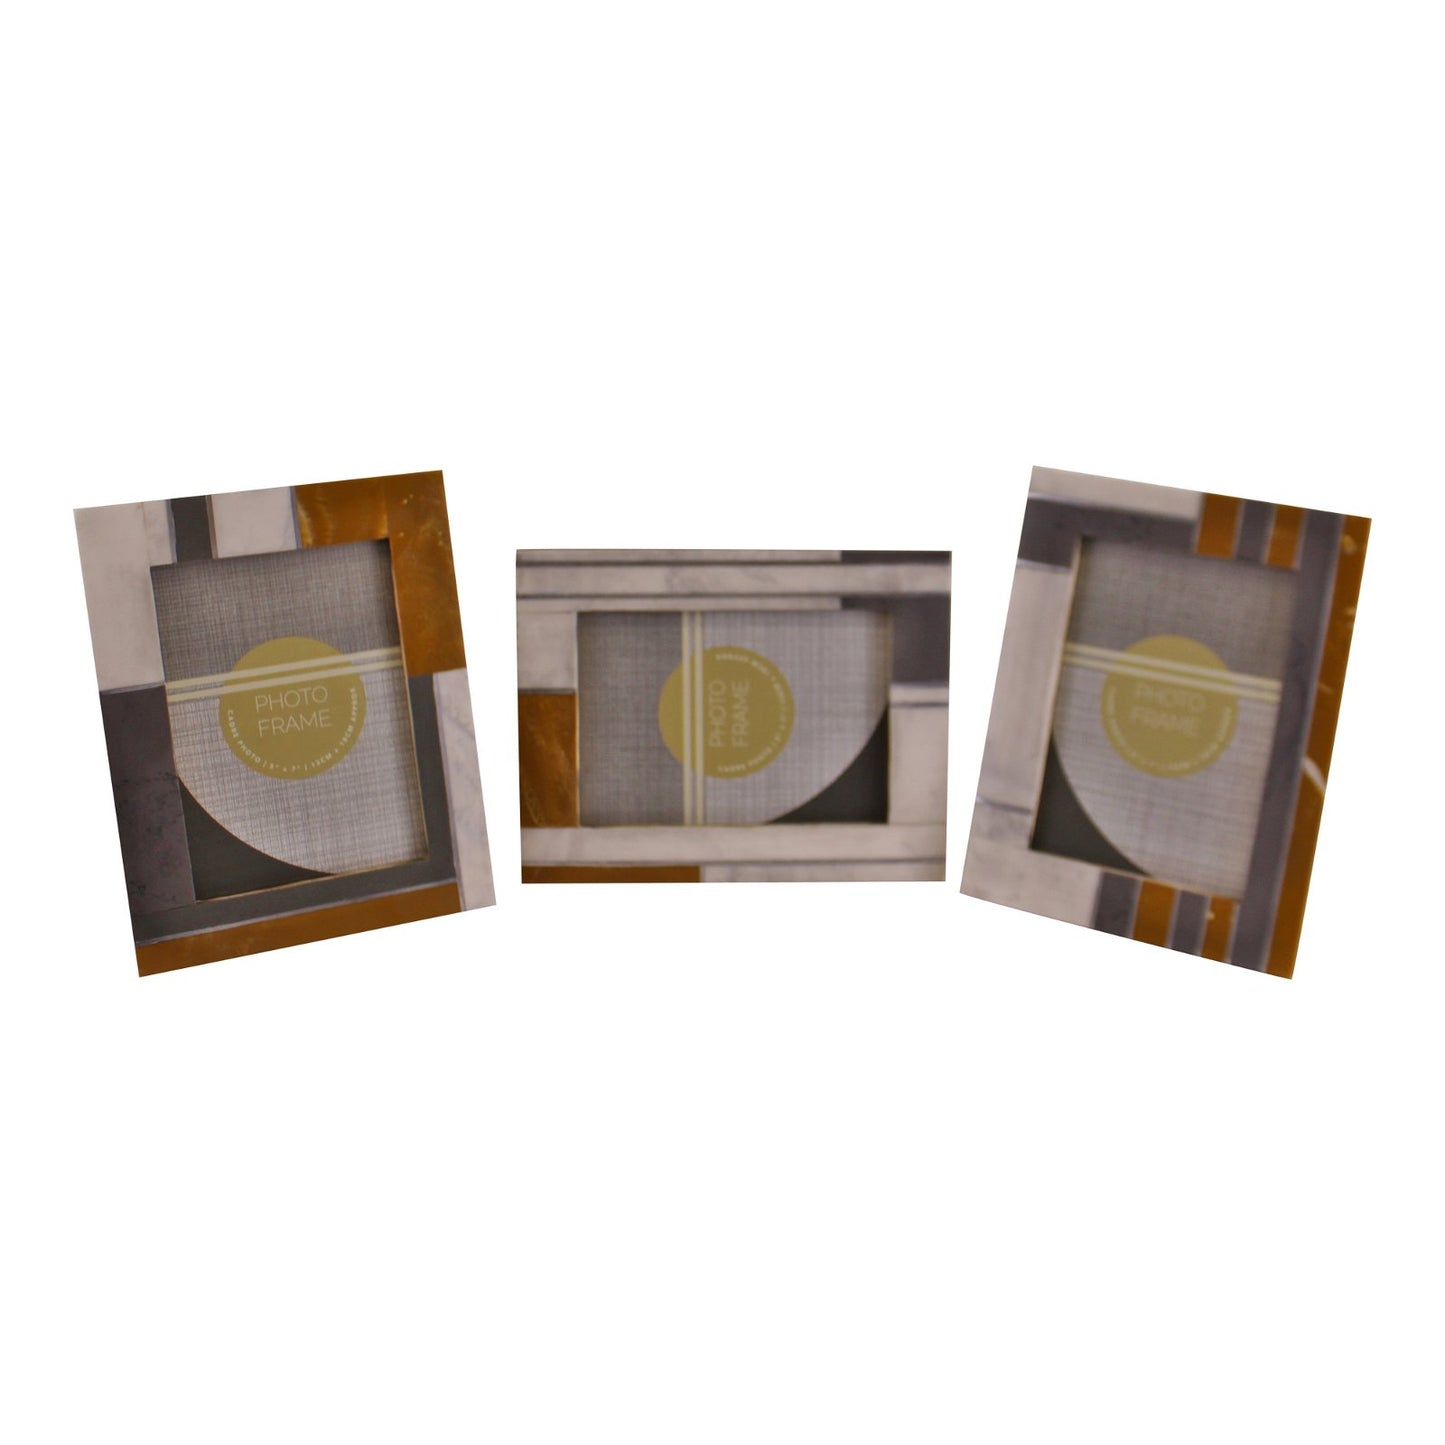 Set of 3 Abstract Design Photo Frames, 5x7